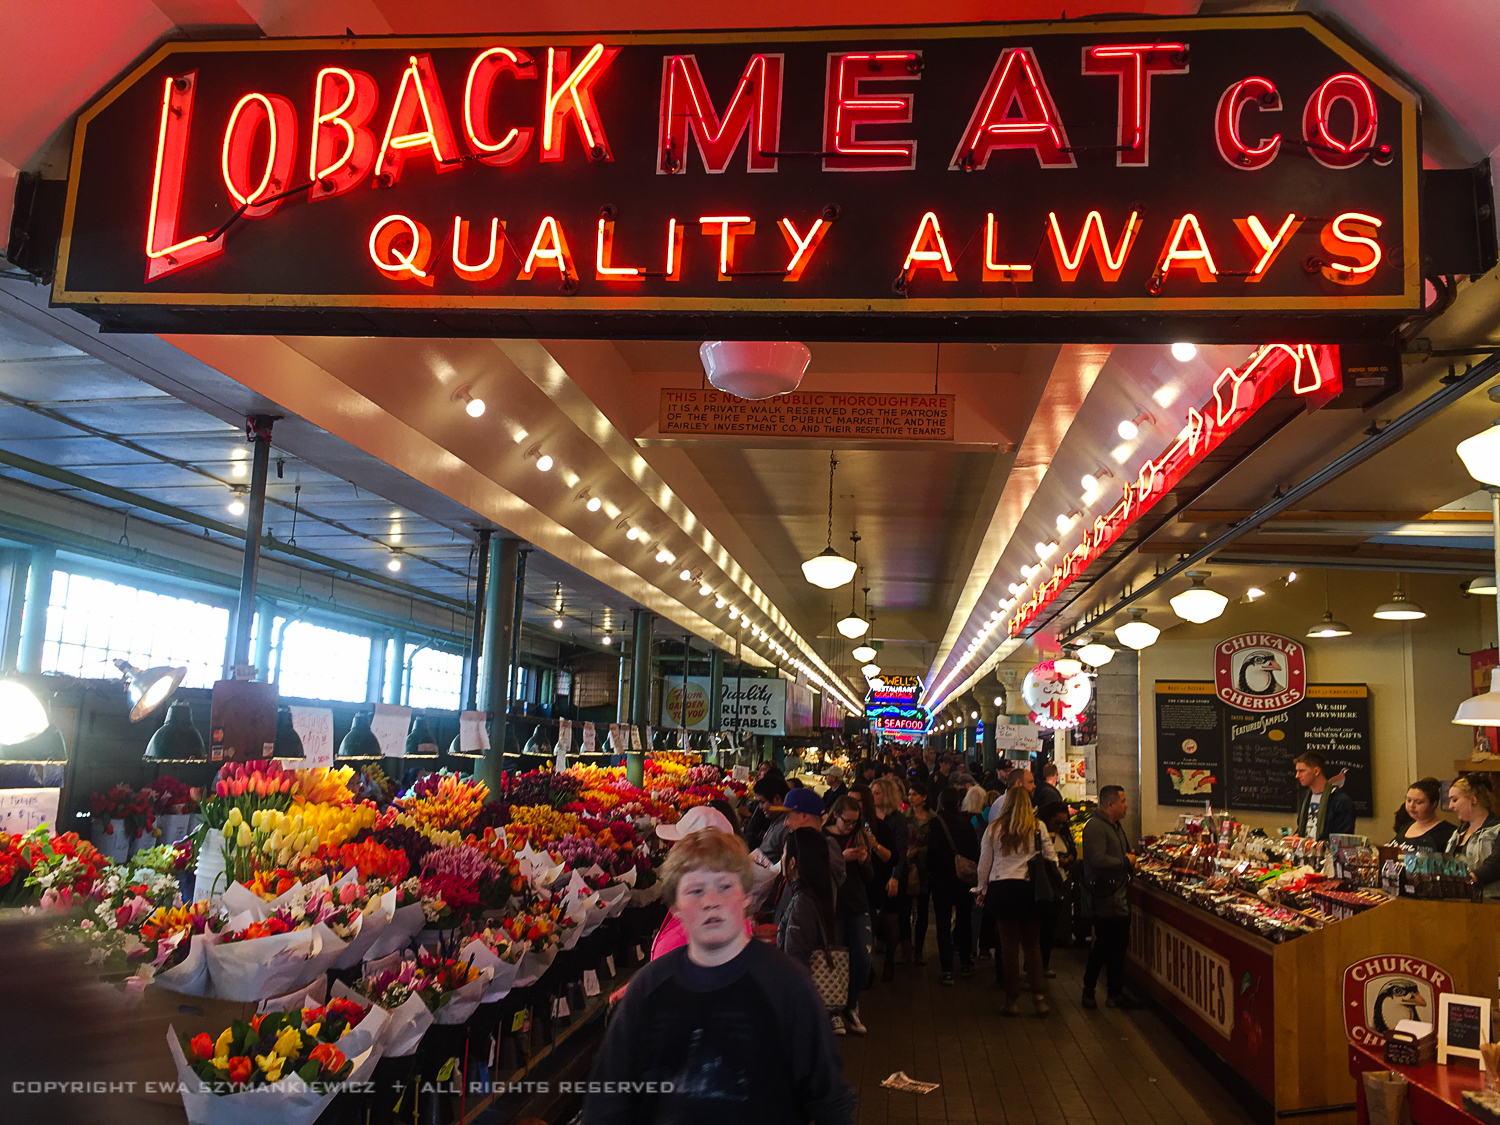 Pike Place Market in Seattle, Alley view